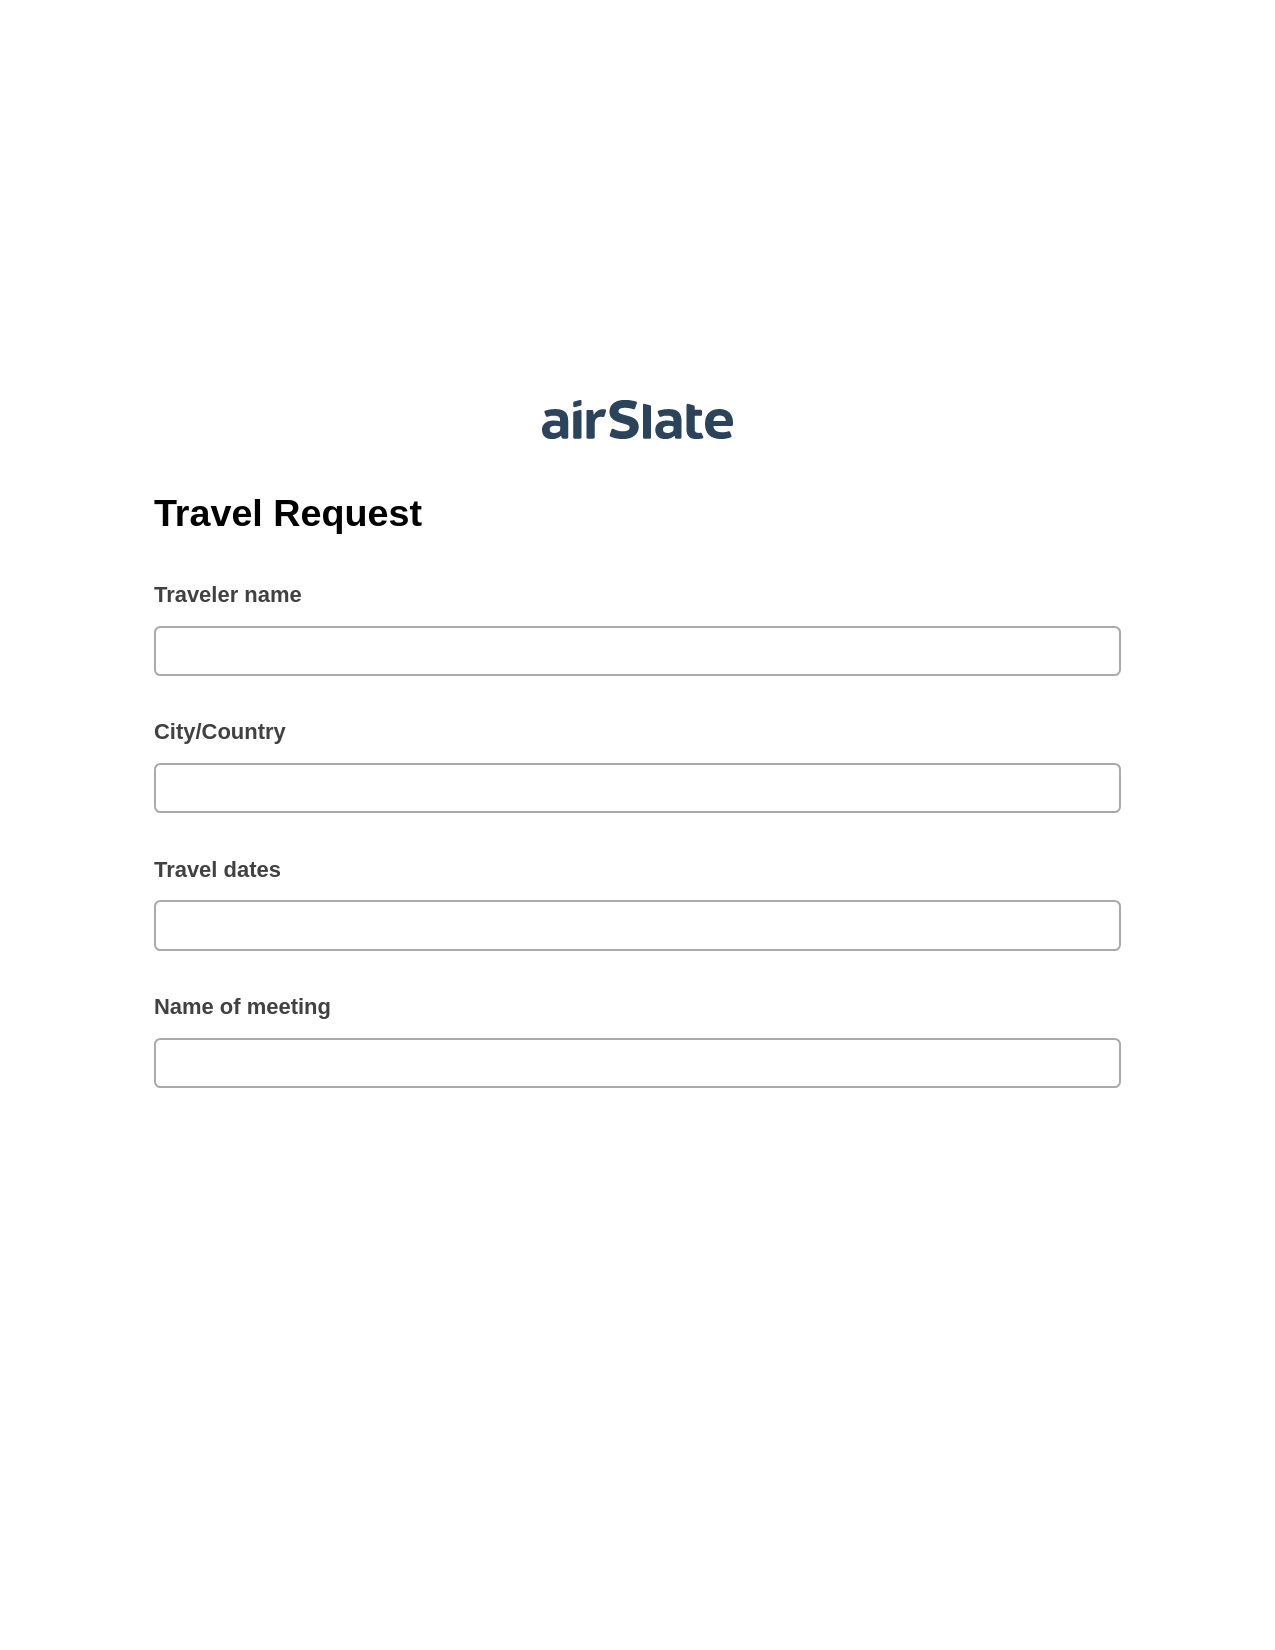 Travel Request Pre-fill Document Bot, Update NetSuite Records Bot, Google Drive Bot